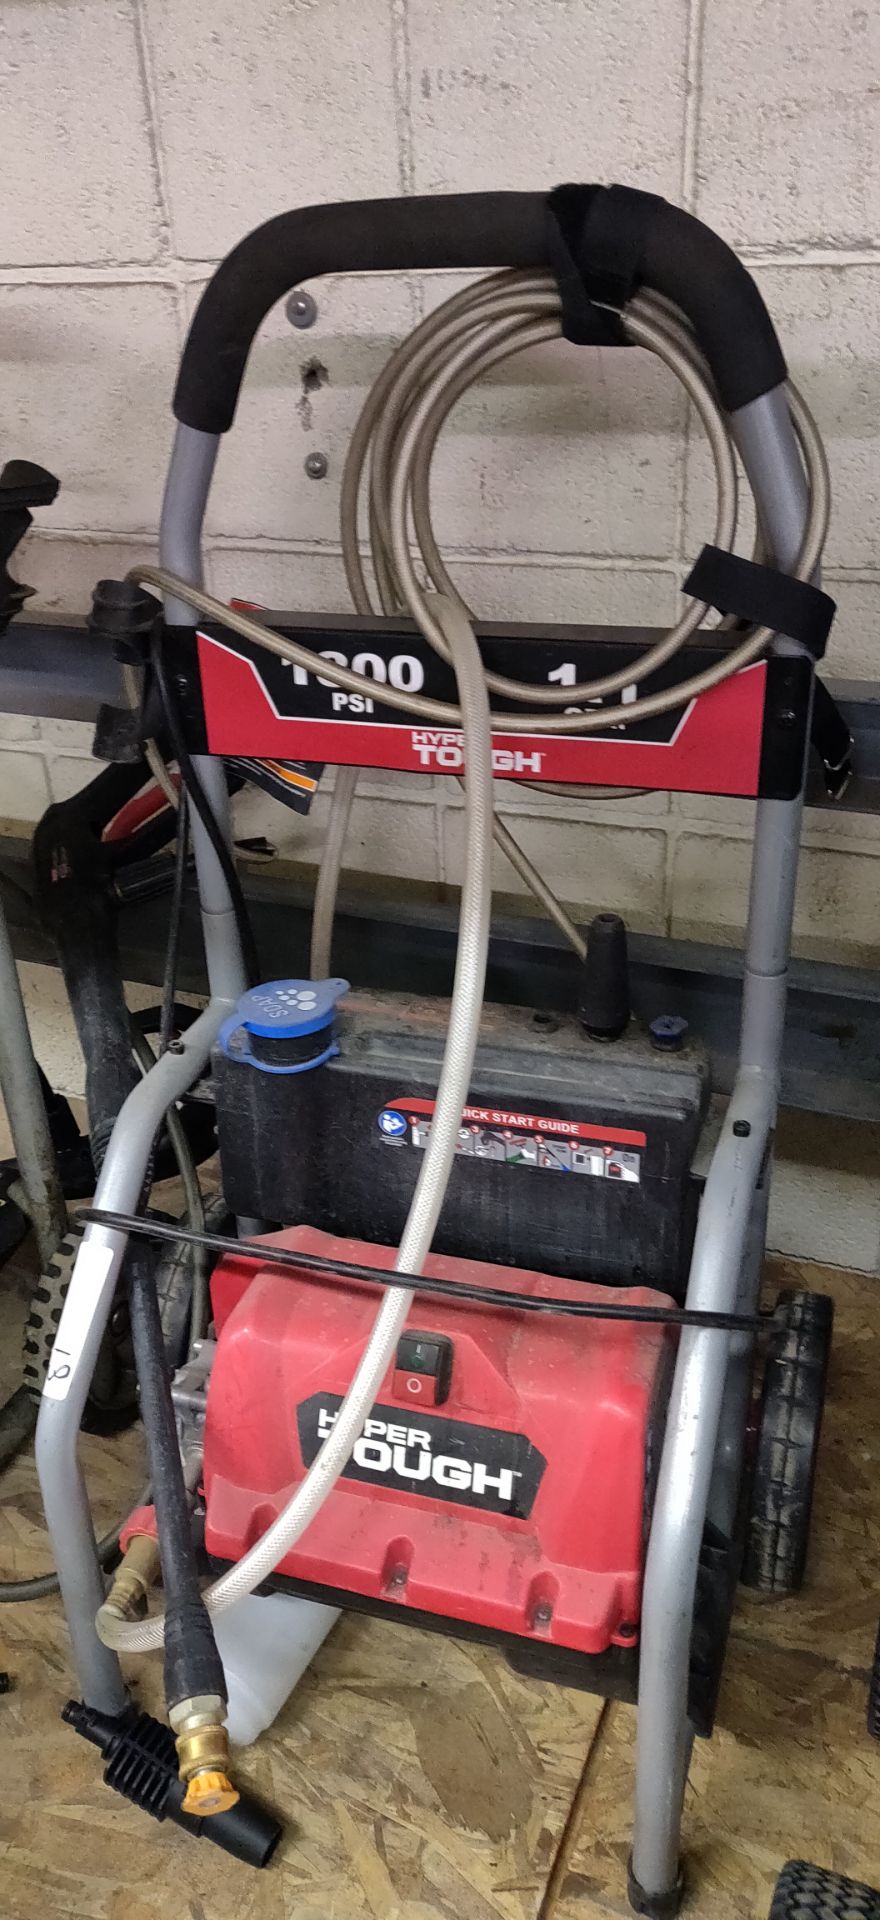 HYPER TOUGH 1800 PSI PRESSURE WASHER - Image 2 of 3